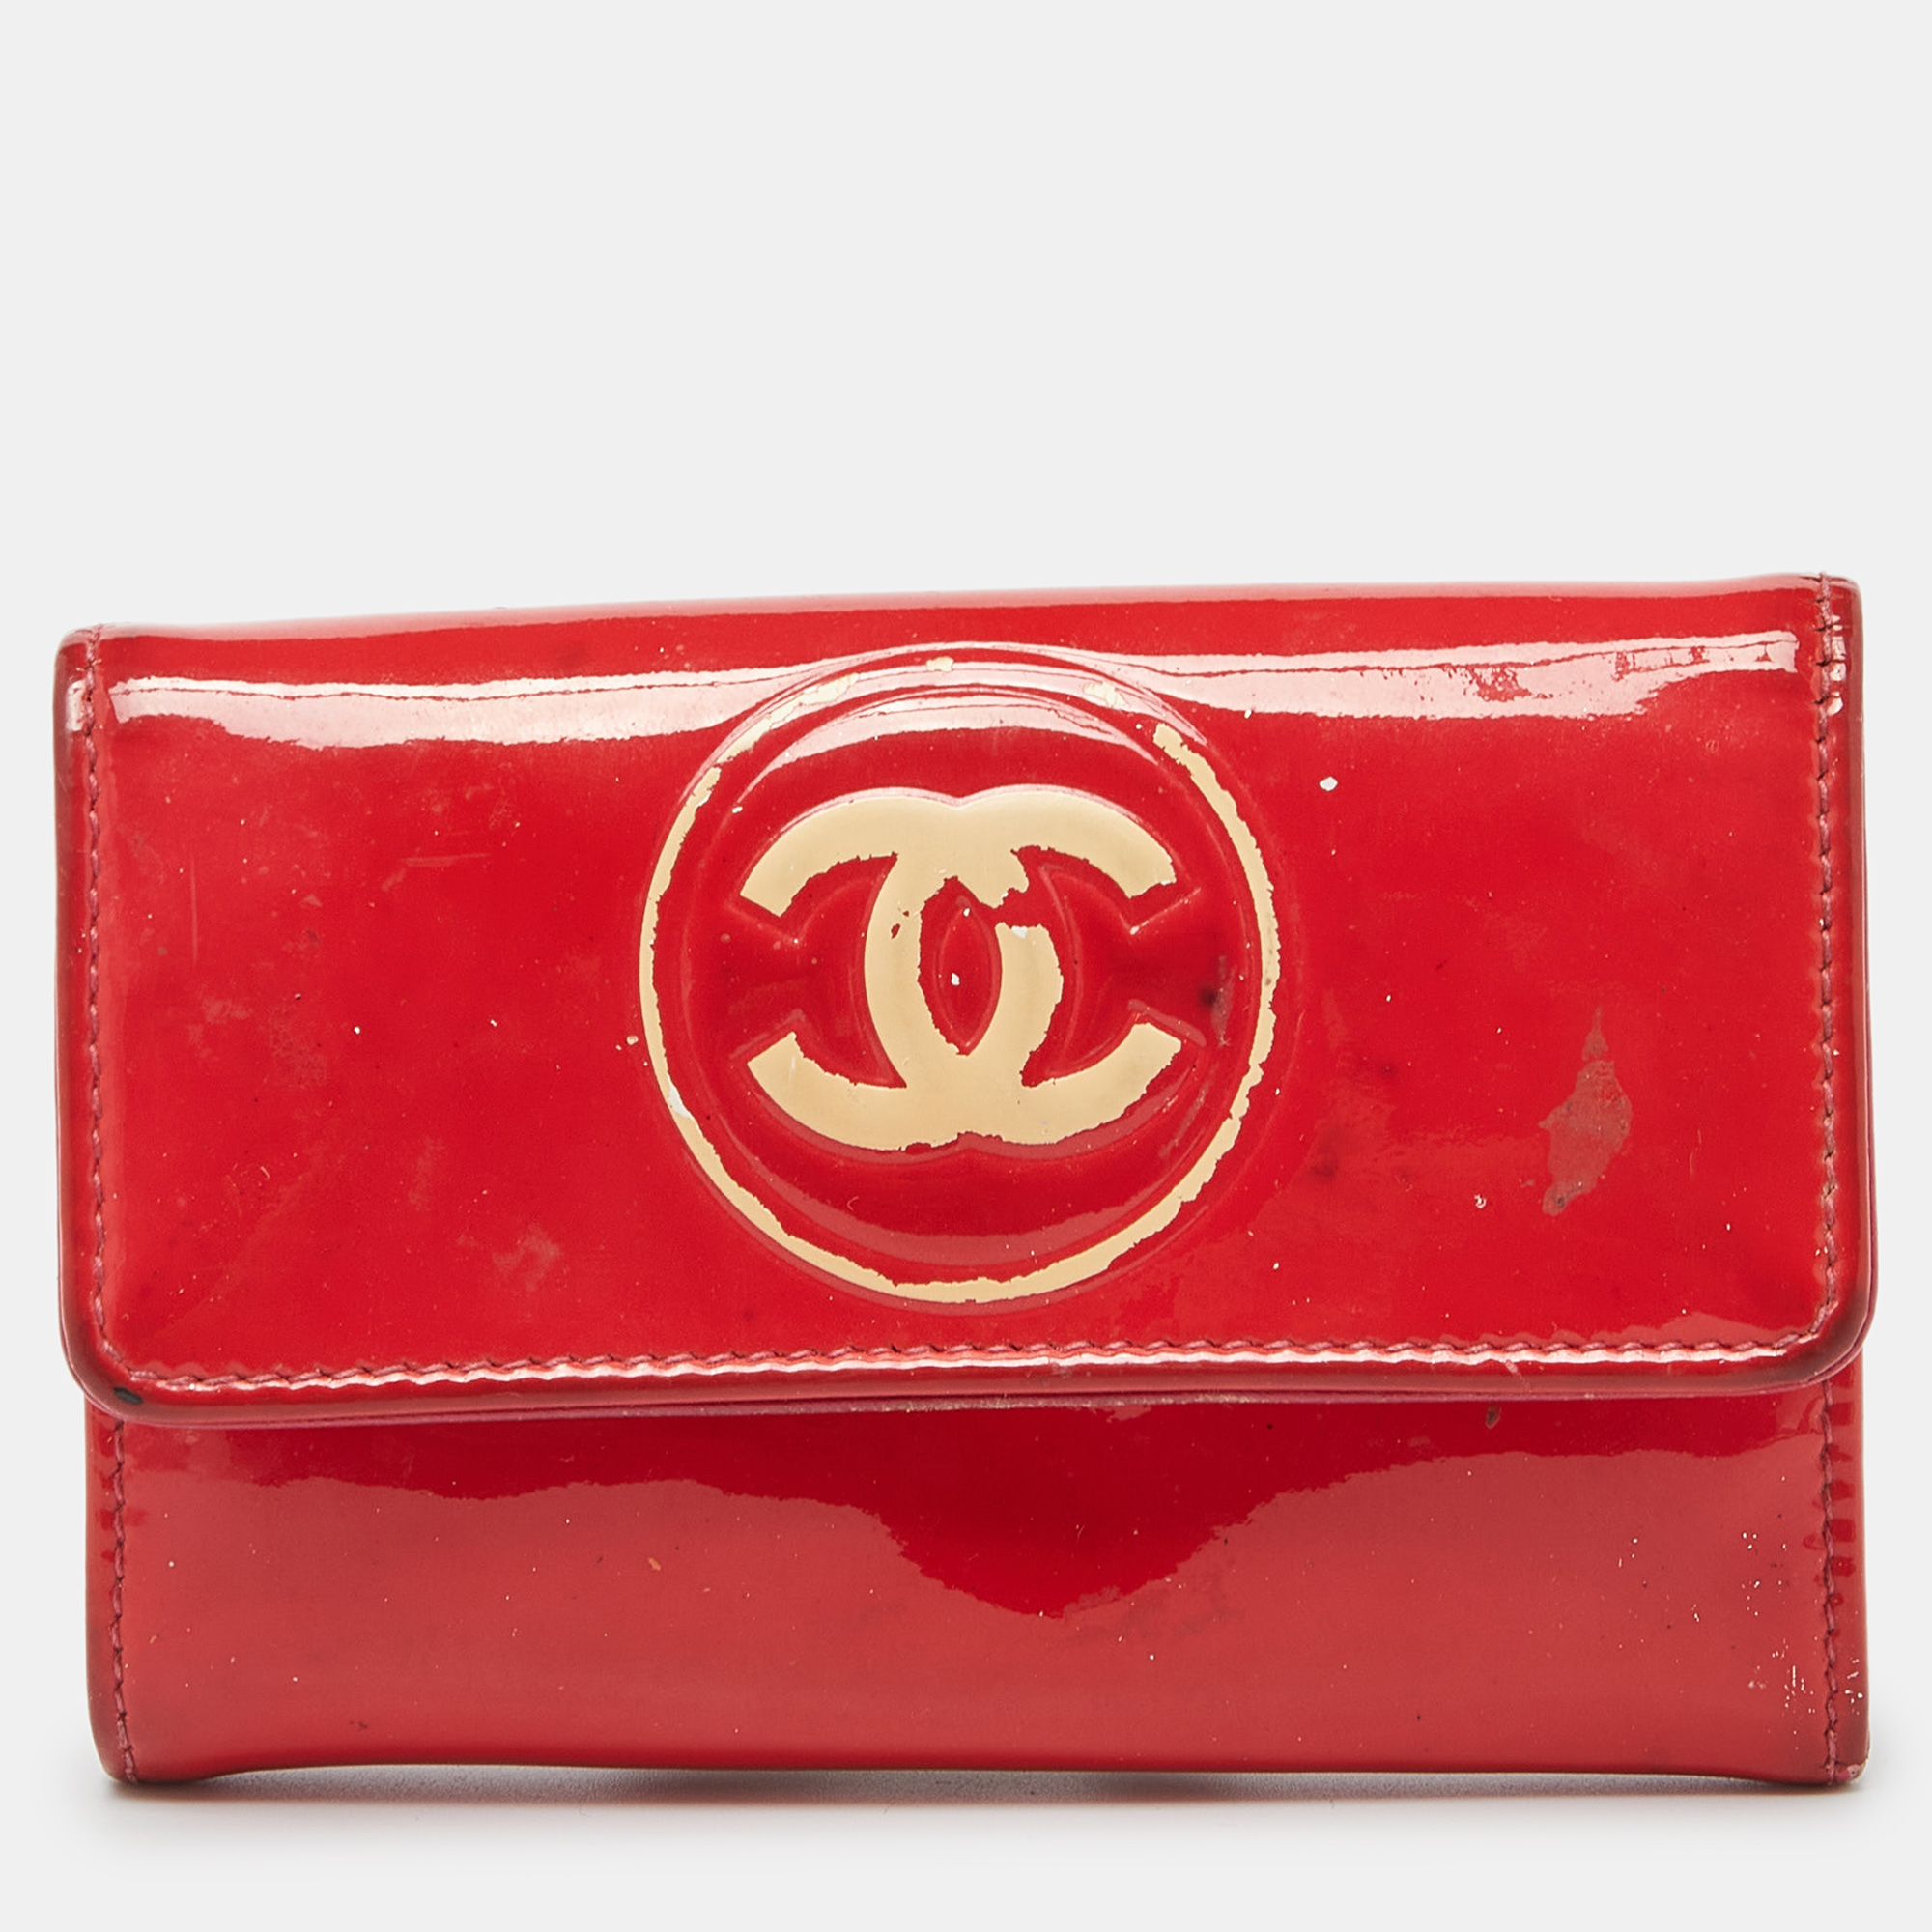 

Chanel Red Patent Leather CC Compact Wallet